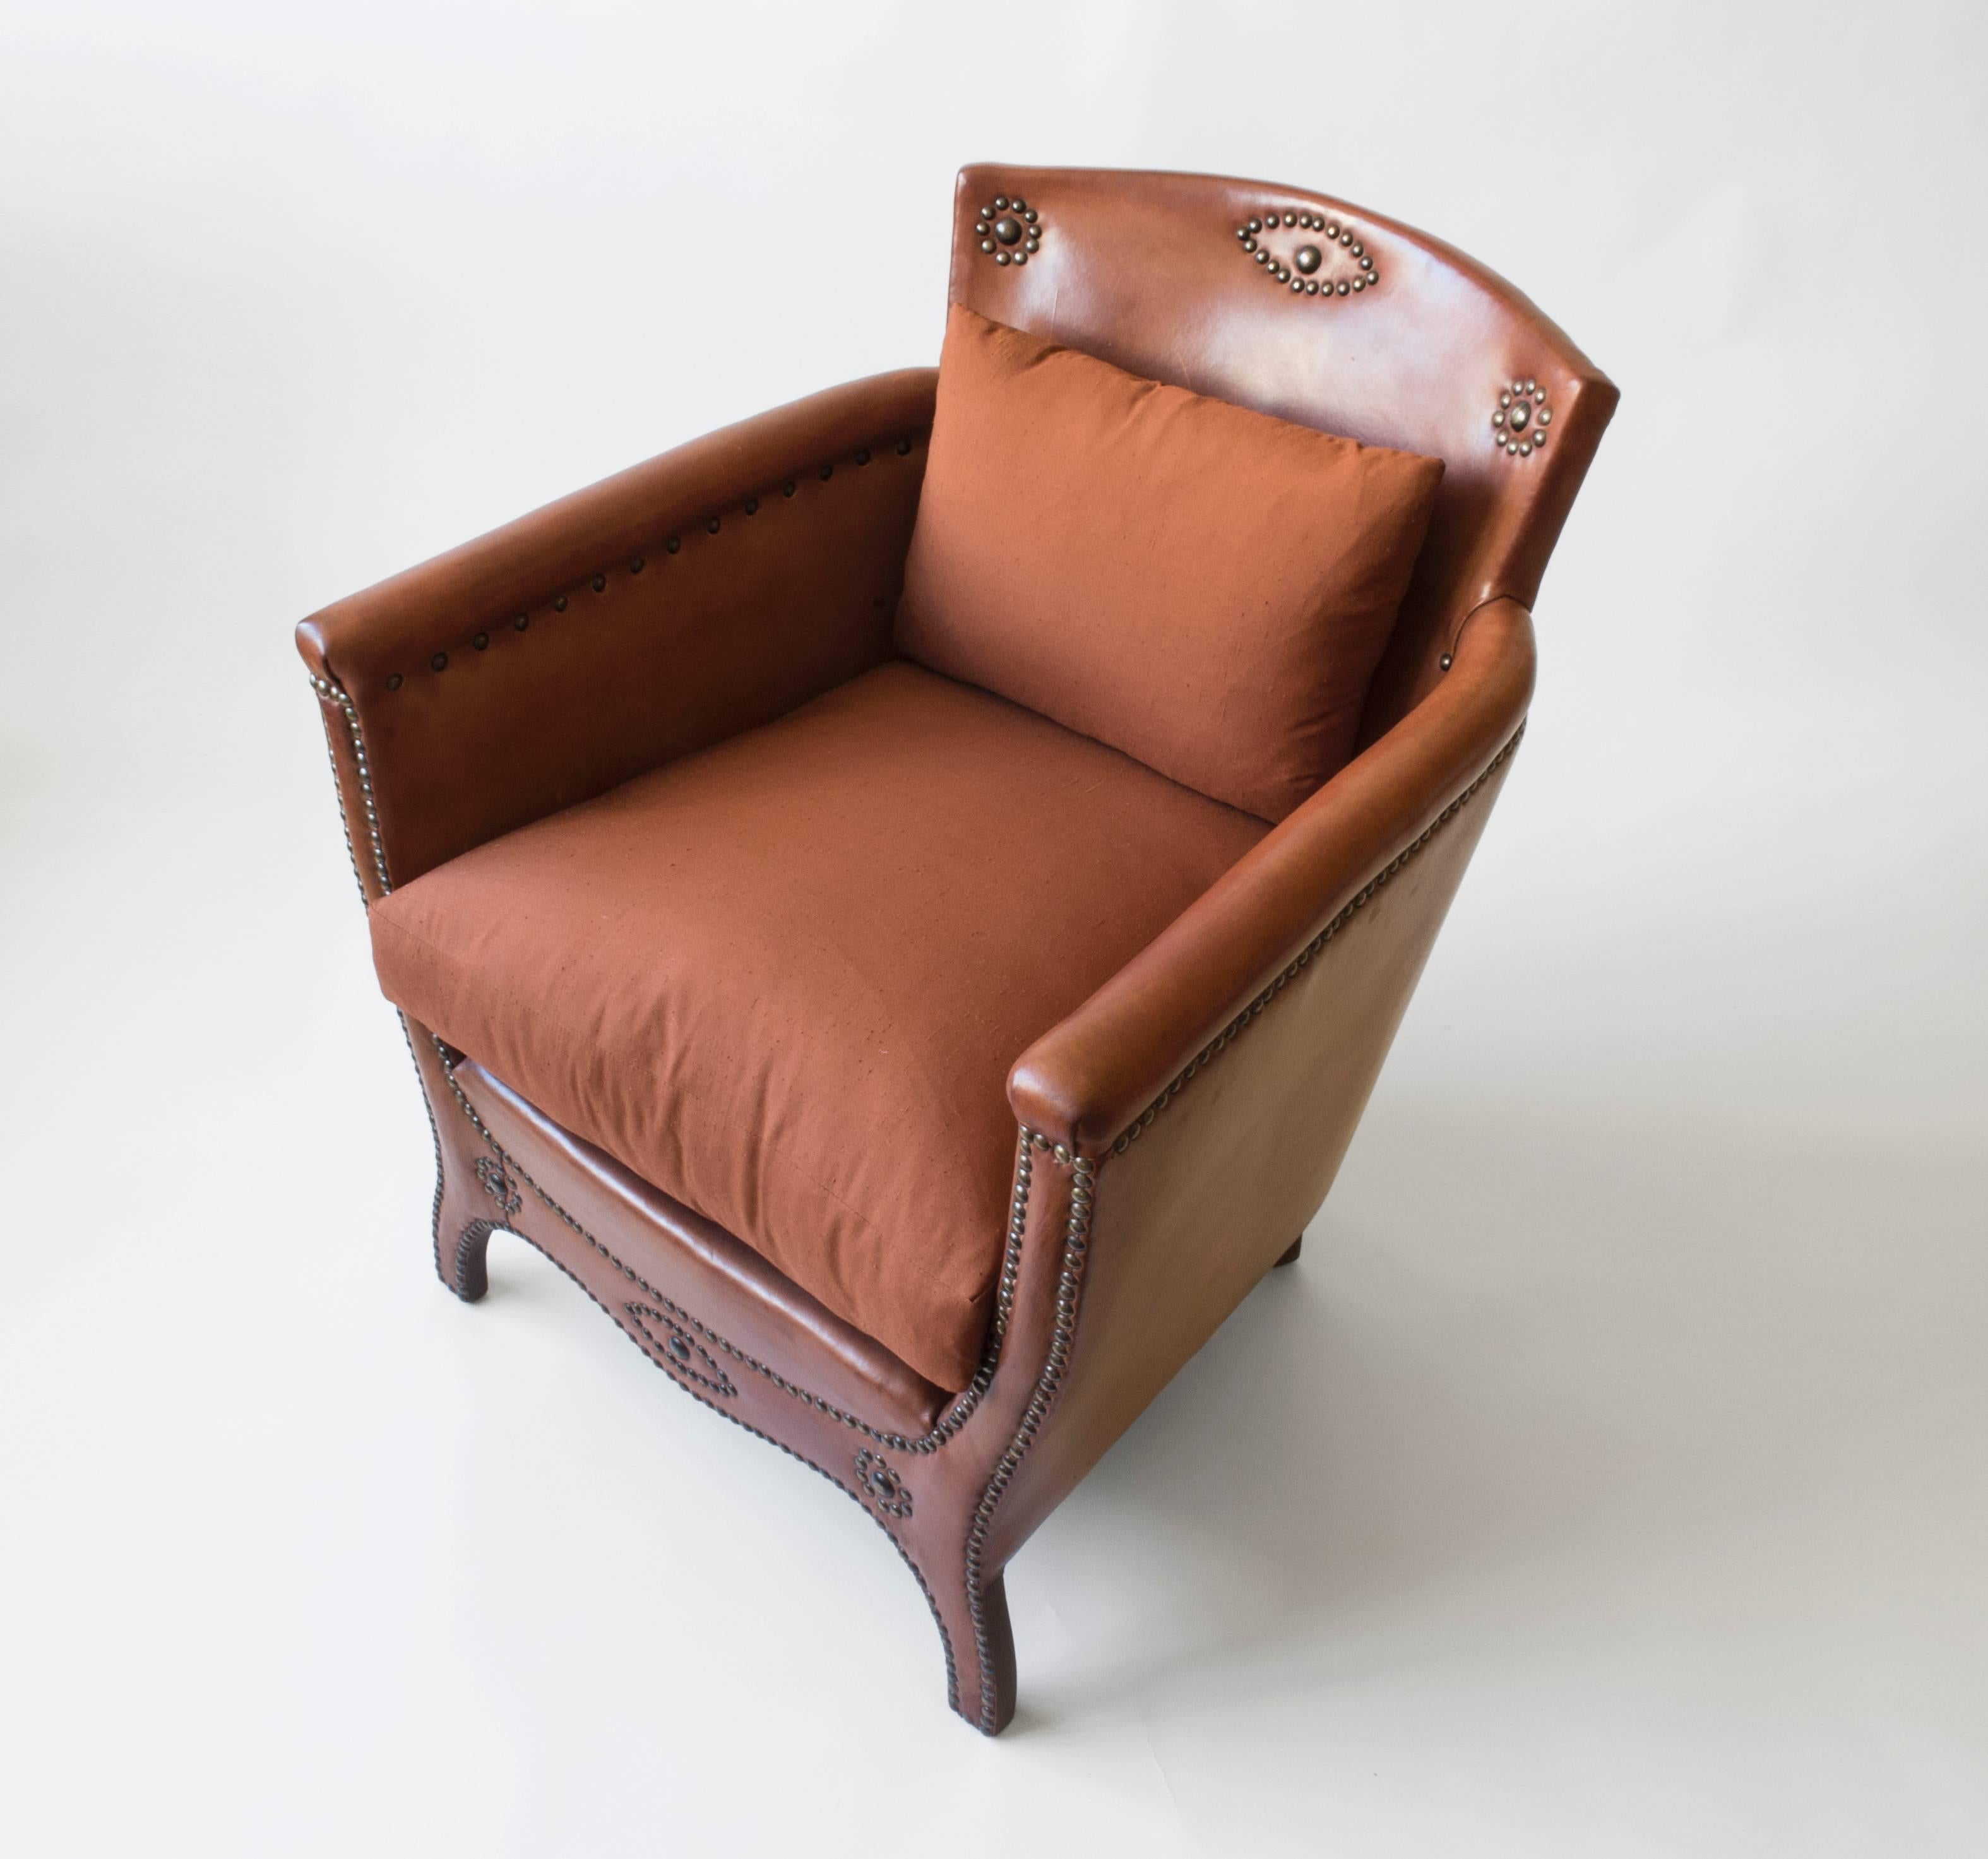 Retaining beautifully preserved and patinated leather, adorned in original decorative brass nails, and newly upholstered in raw silk over comfortable down-stuffed cushions. This compact armchair is a rich and stylish addition to any room. The arched